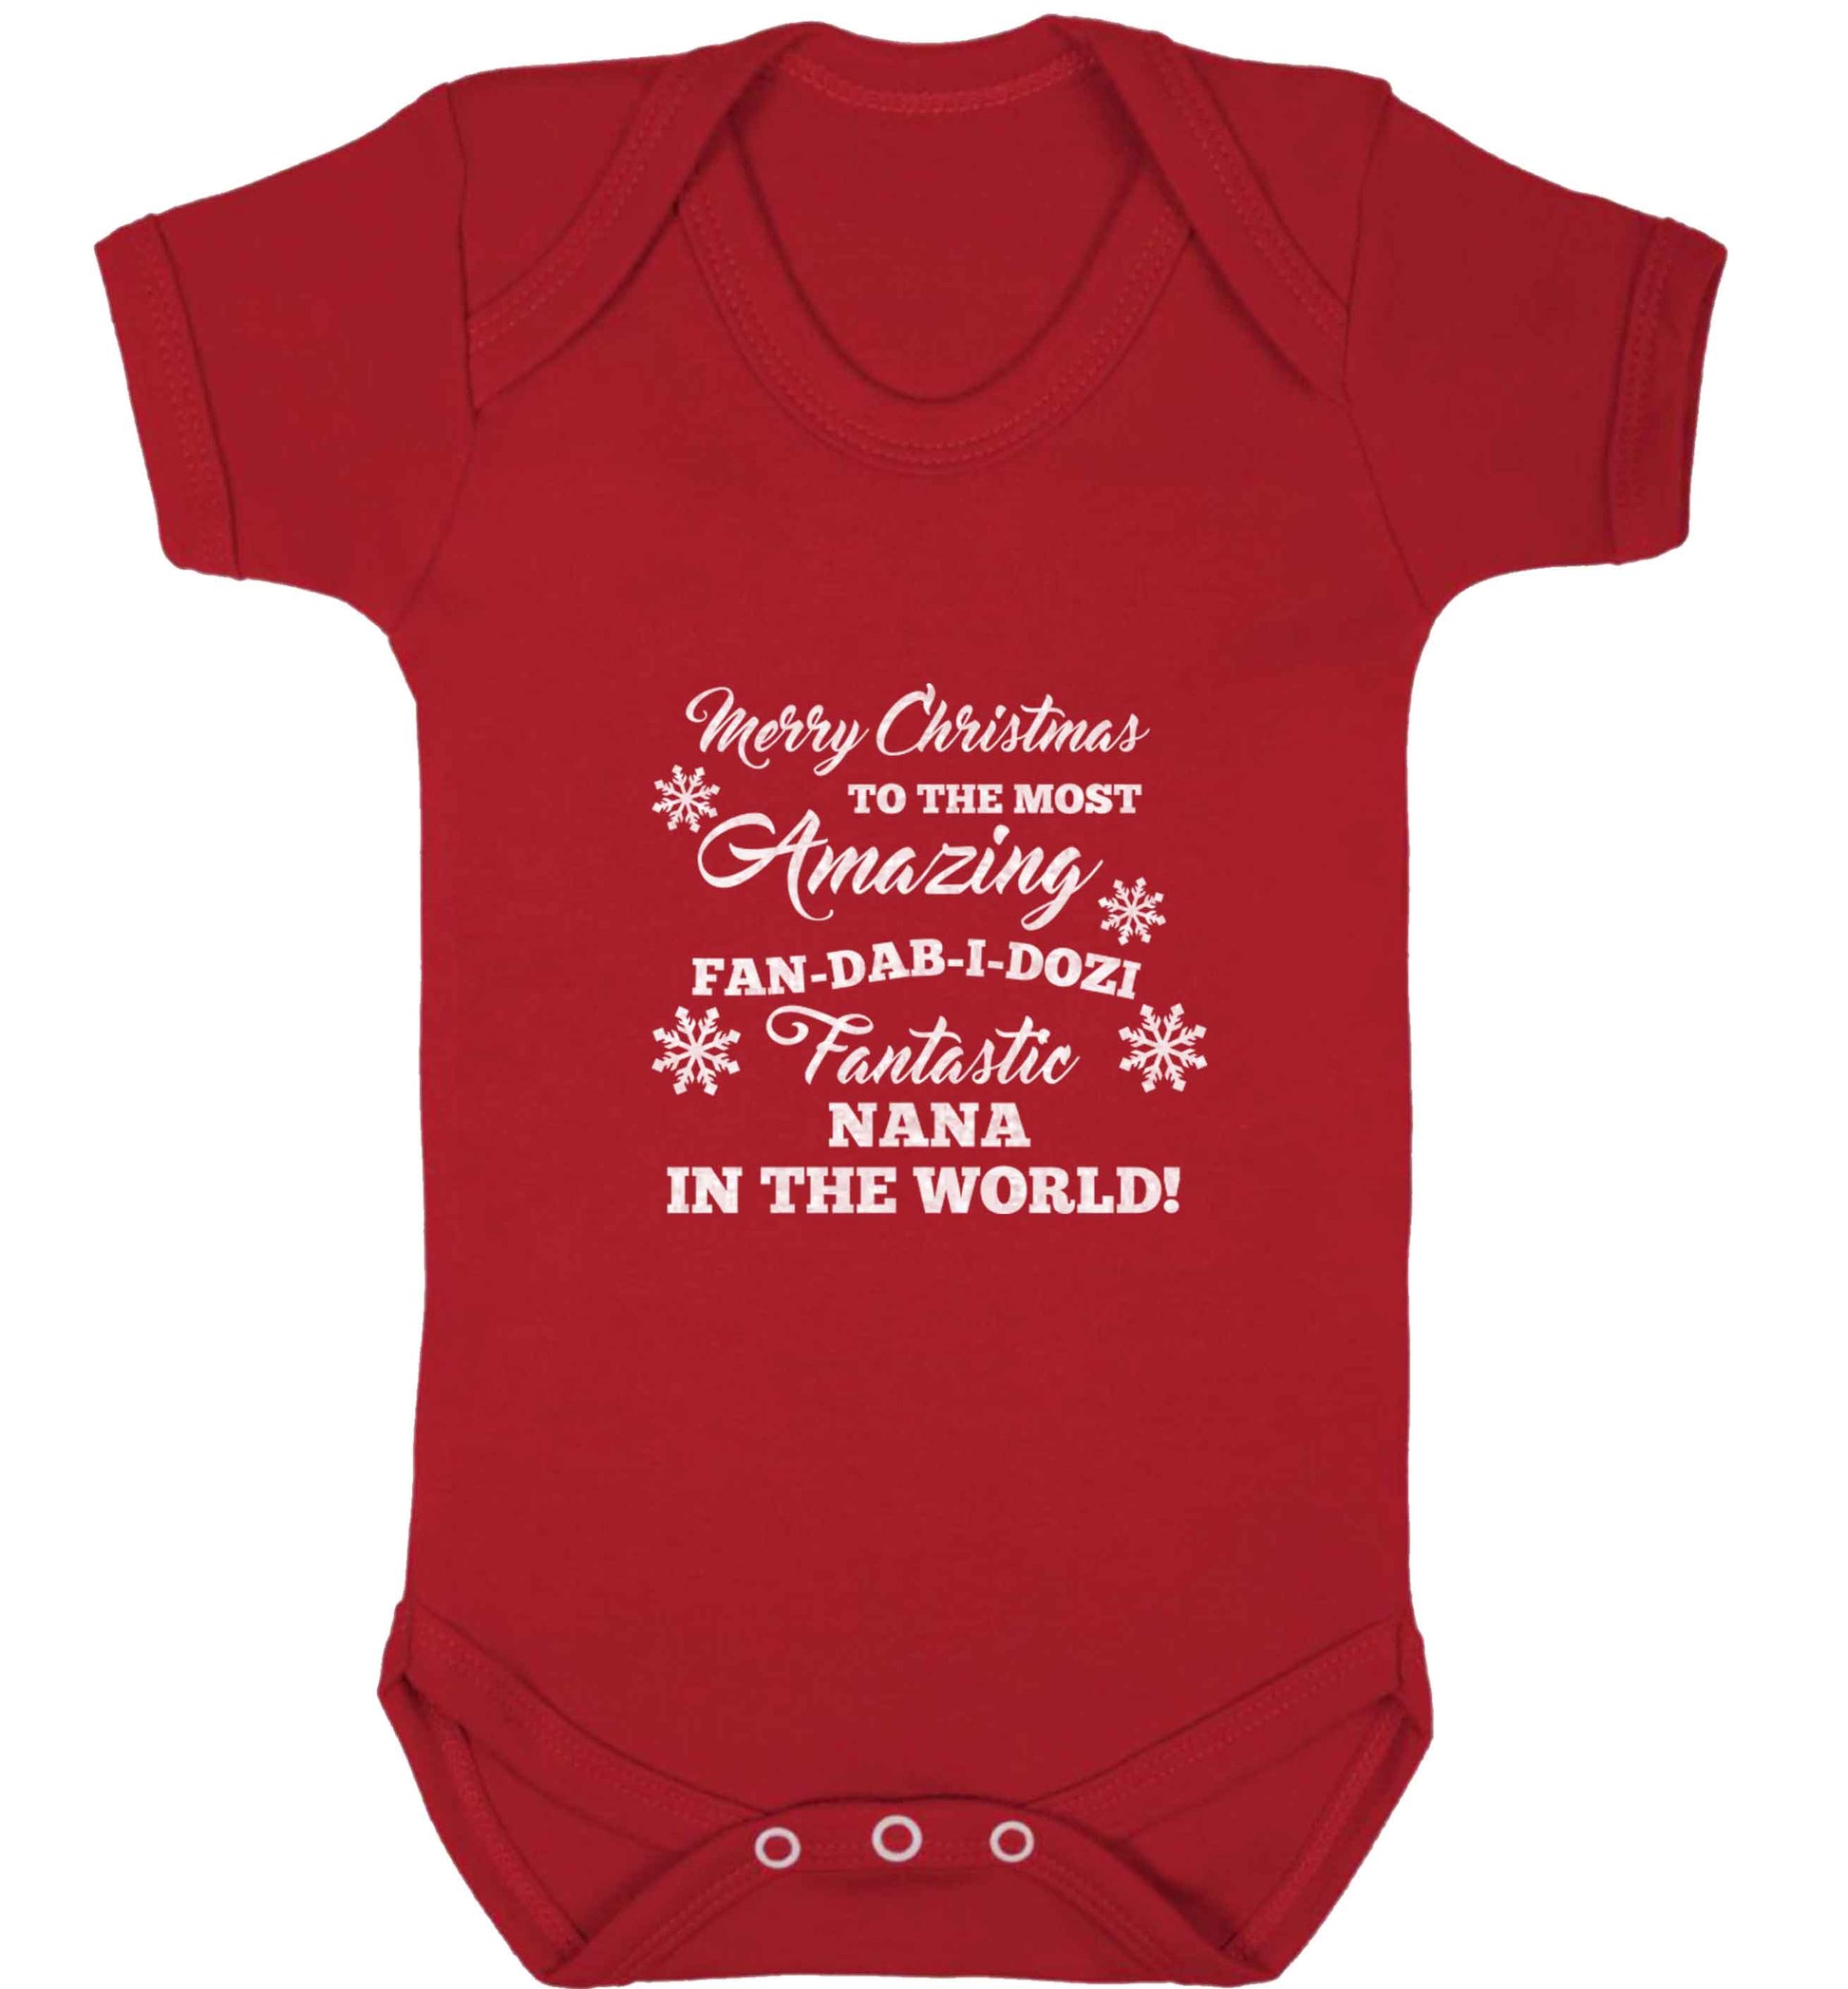 Merry Christmas to the most amazing fan-dab-i-dozi fantasic Nana in the world baby vest red 18-24 months